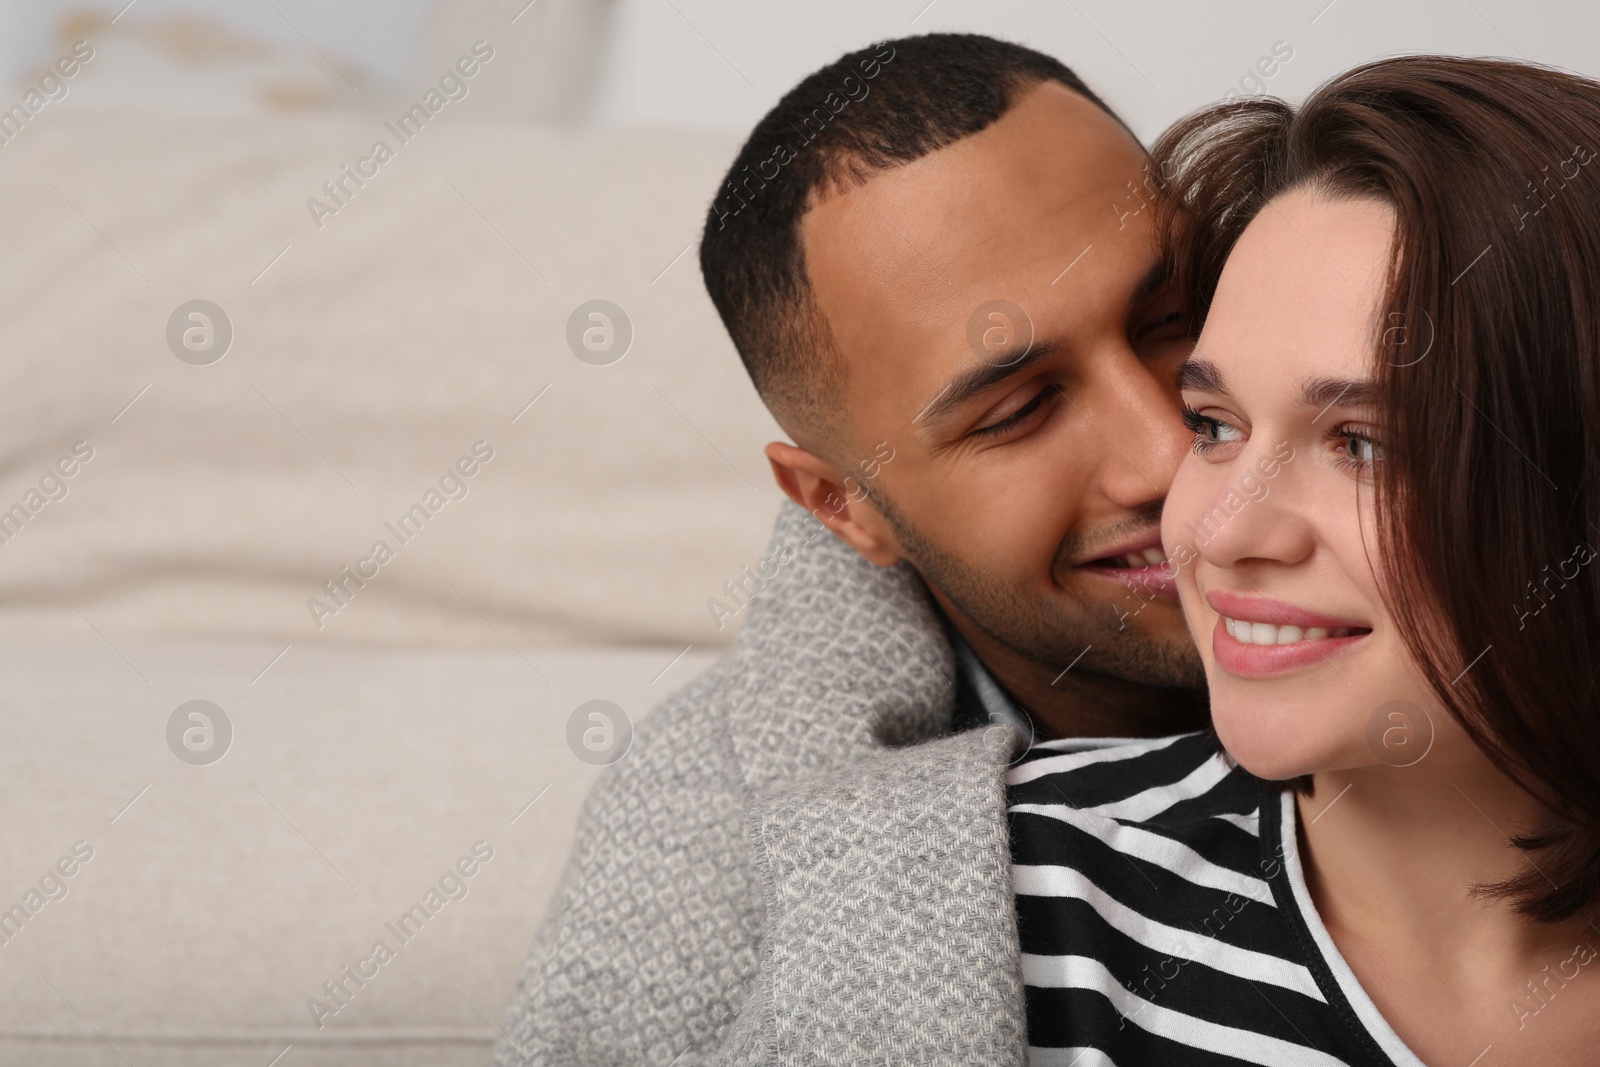 Photo of Dating agency. Man kissing his girlfriend indoors, space for text